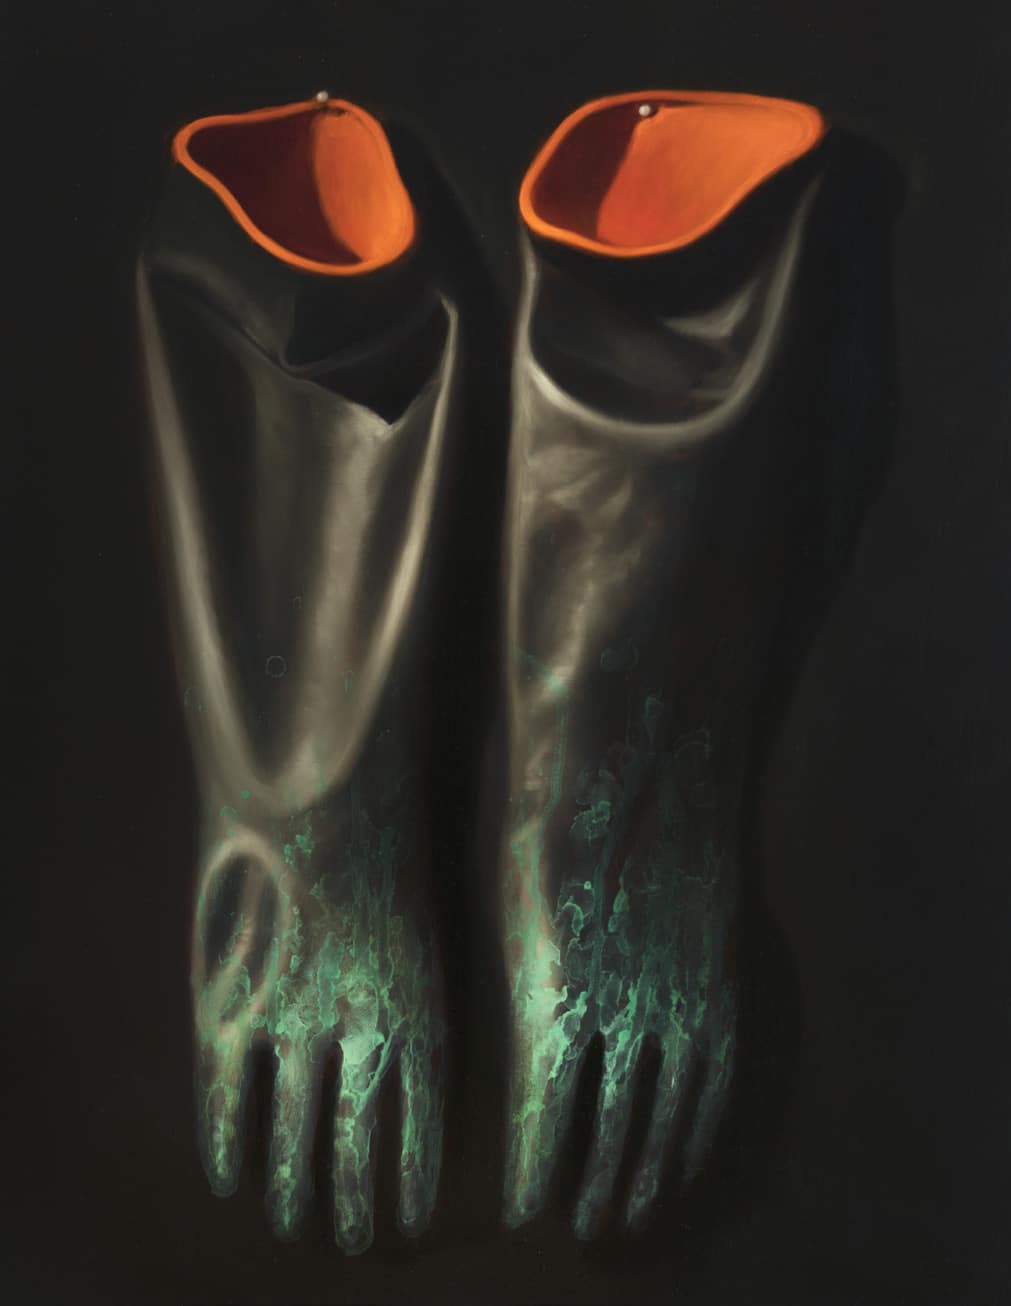 Chinese Gloves, 2020, Oil on gesso board, 45.5 x 61 cm, 17 7/8 x 24 1/8 in © Ken Currie, Courtesy of Flowers Gallery